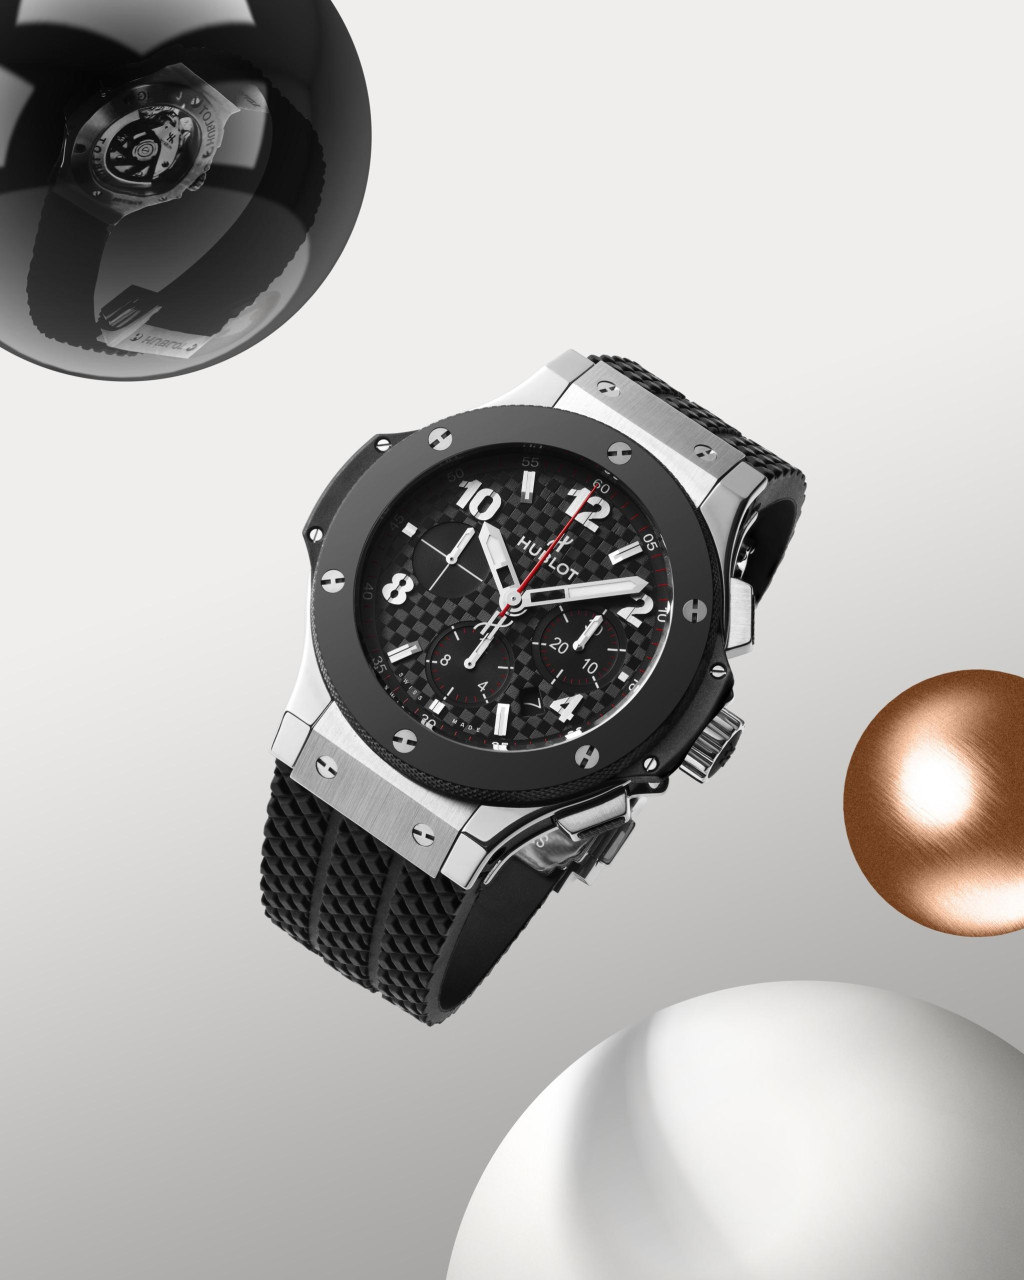 Hublot Men's Watches : The Perfect Alliance between Elegance and Performance